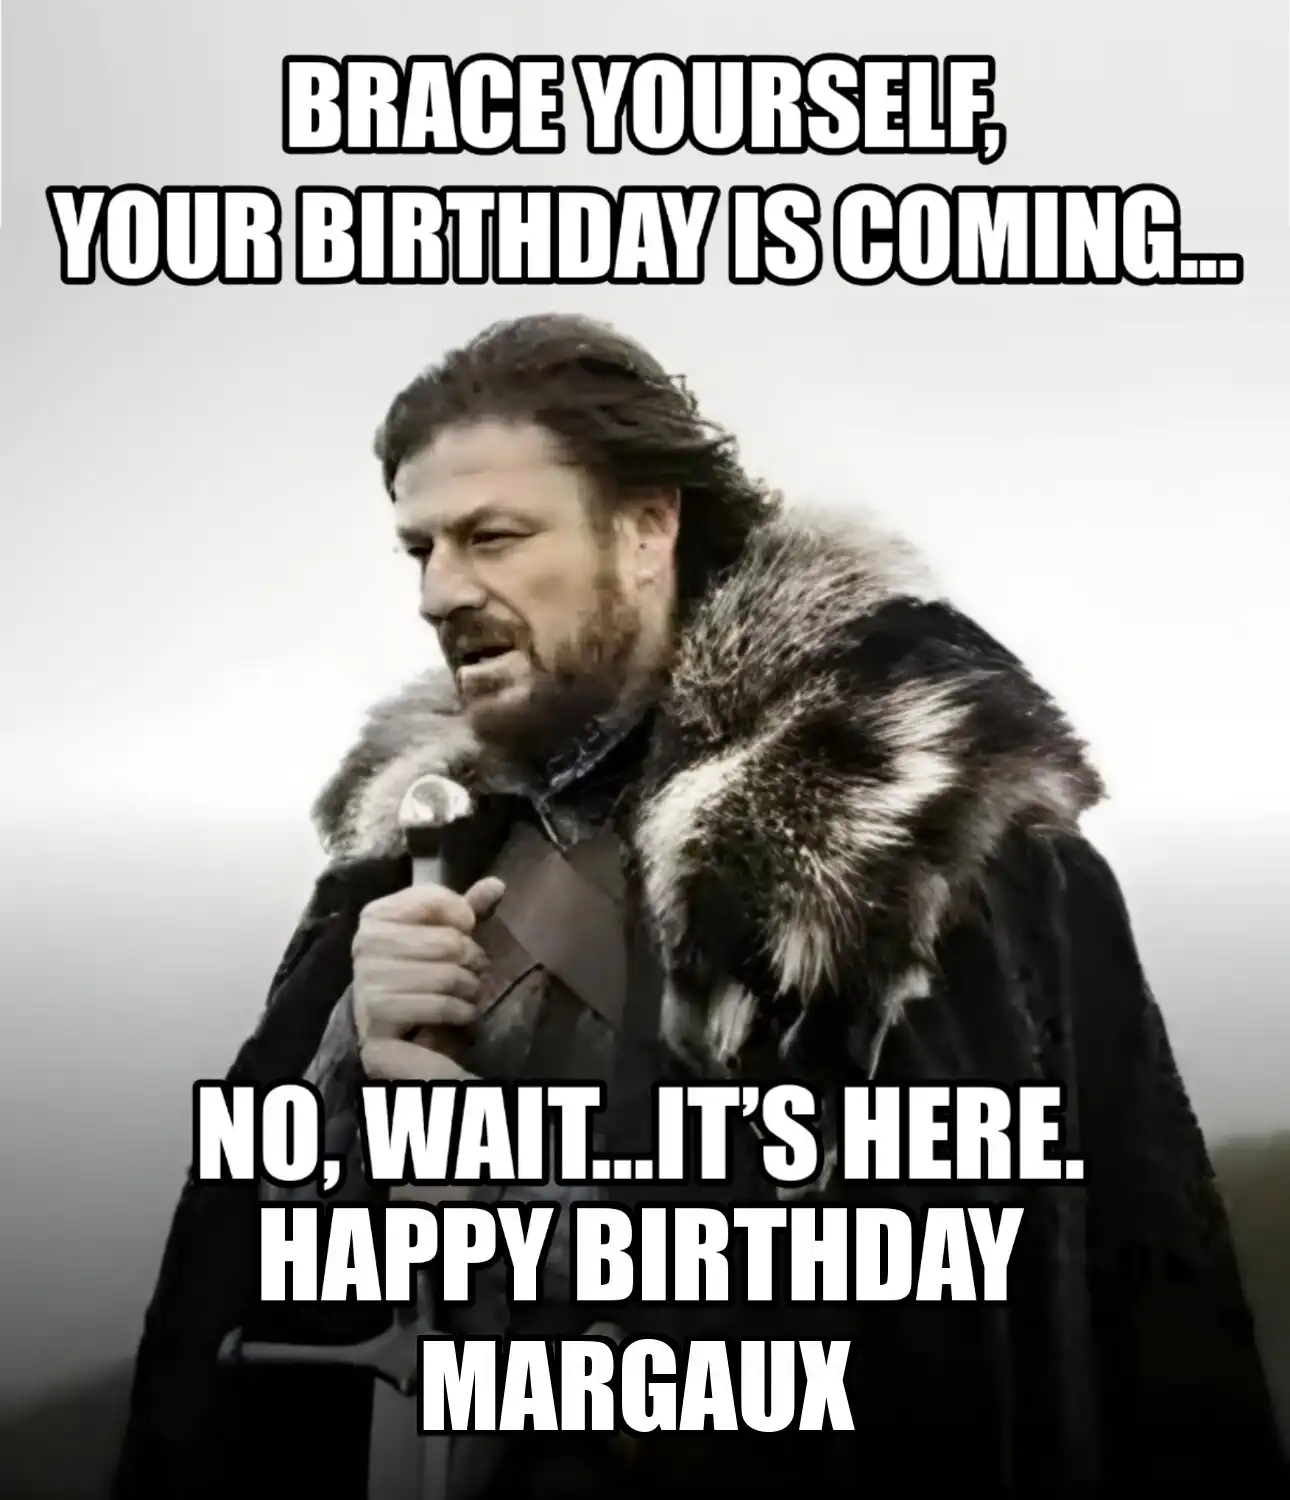 Happy Birthday Margaux Brace Yourself Your Birthday Is Coming Meme